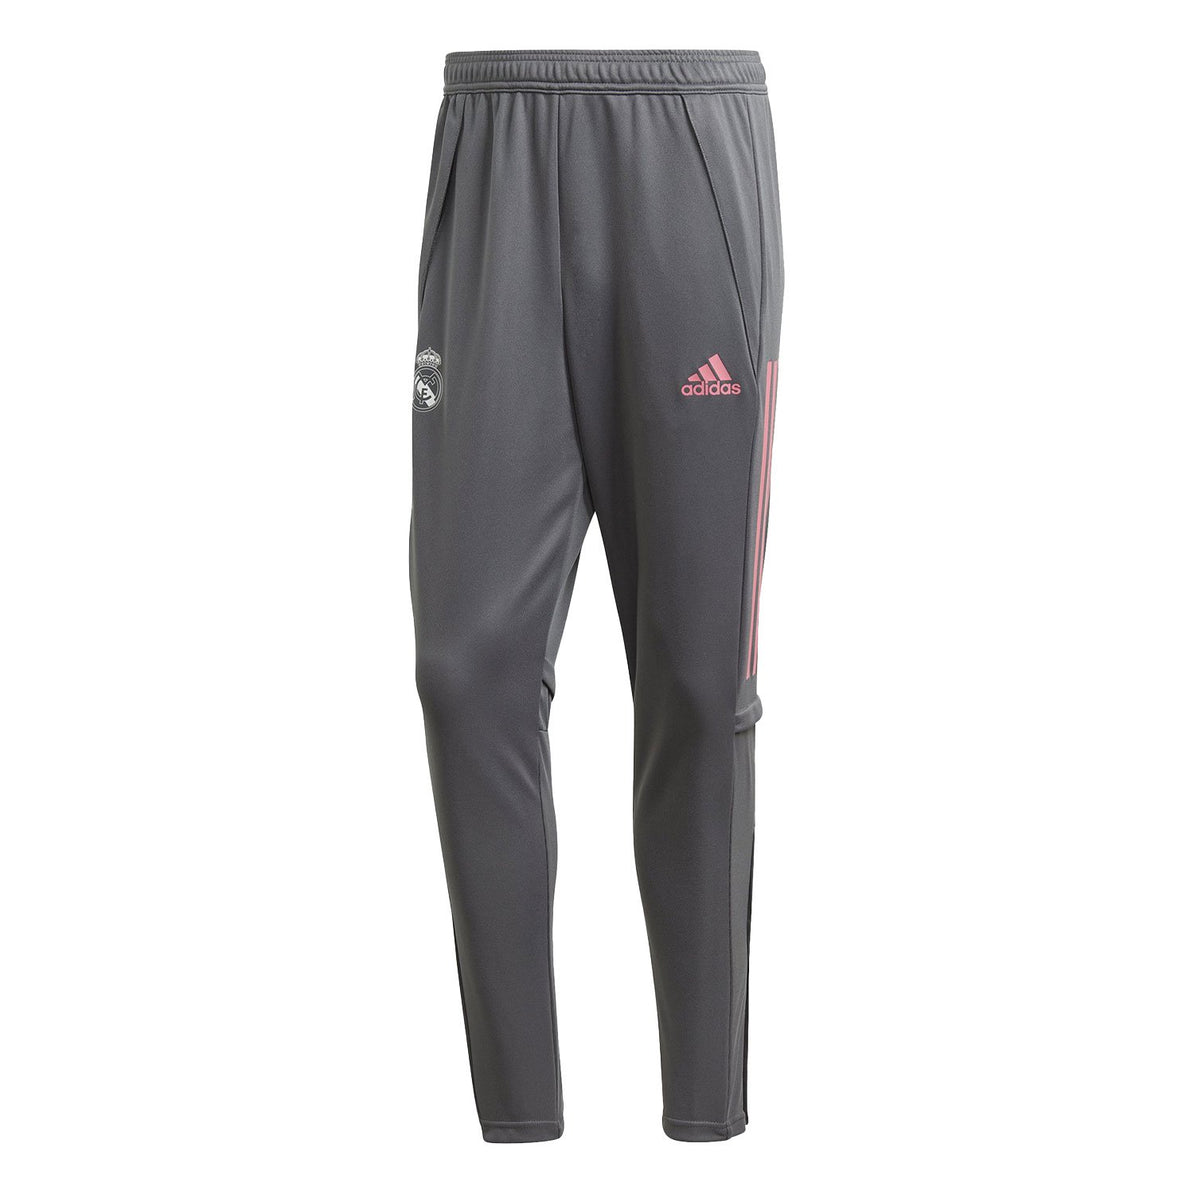 real madrid trousers